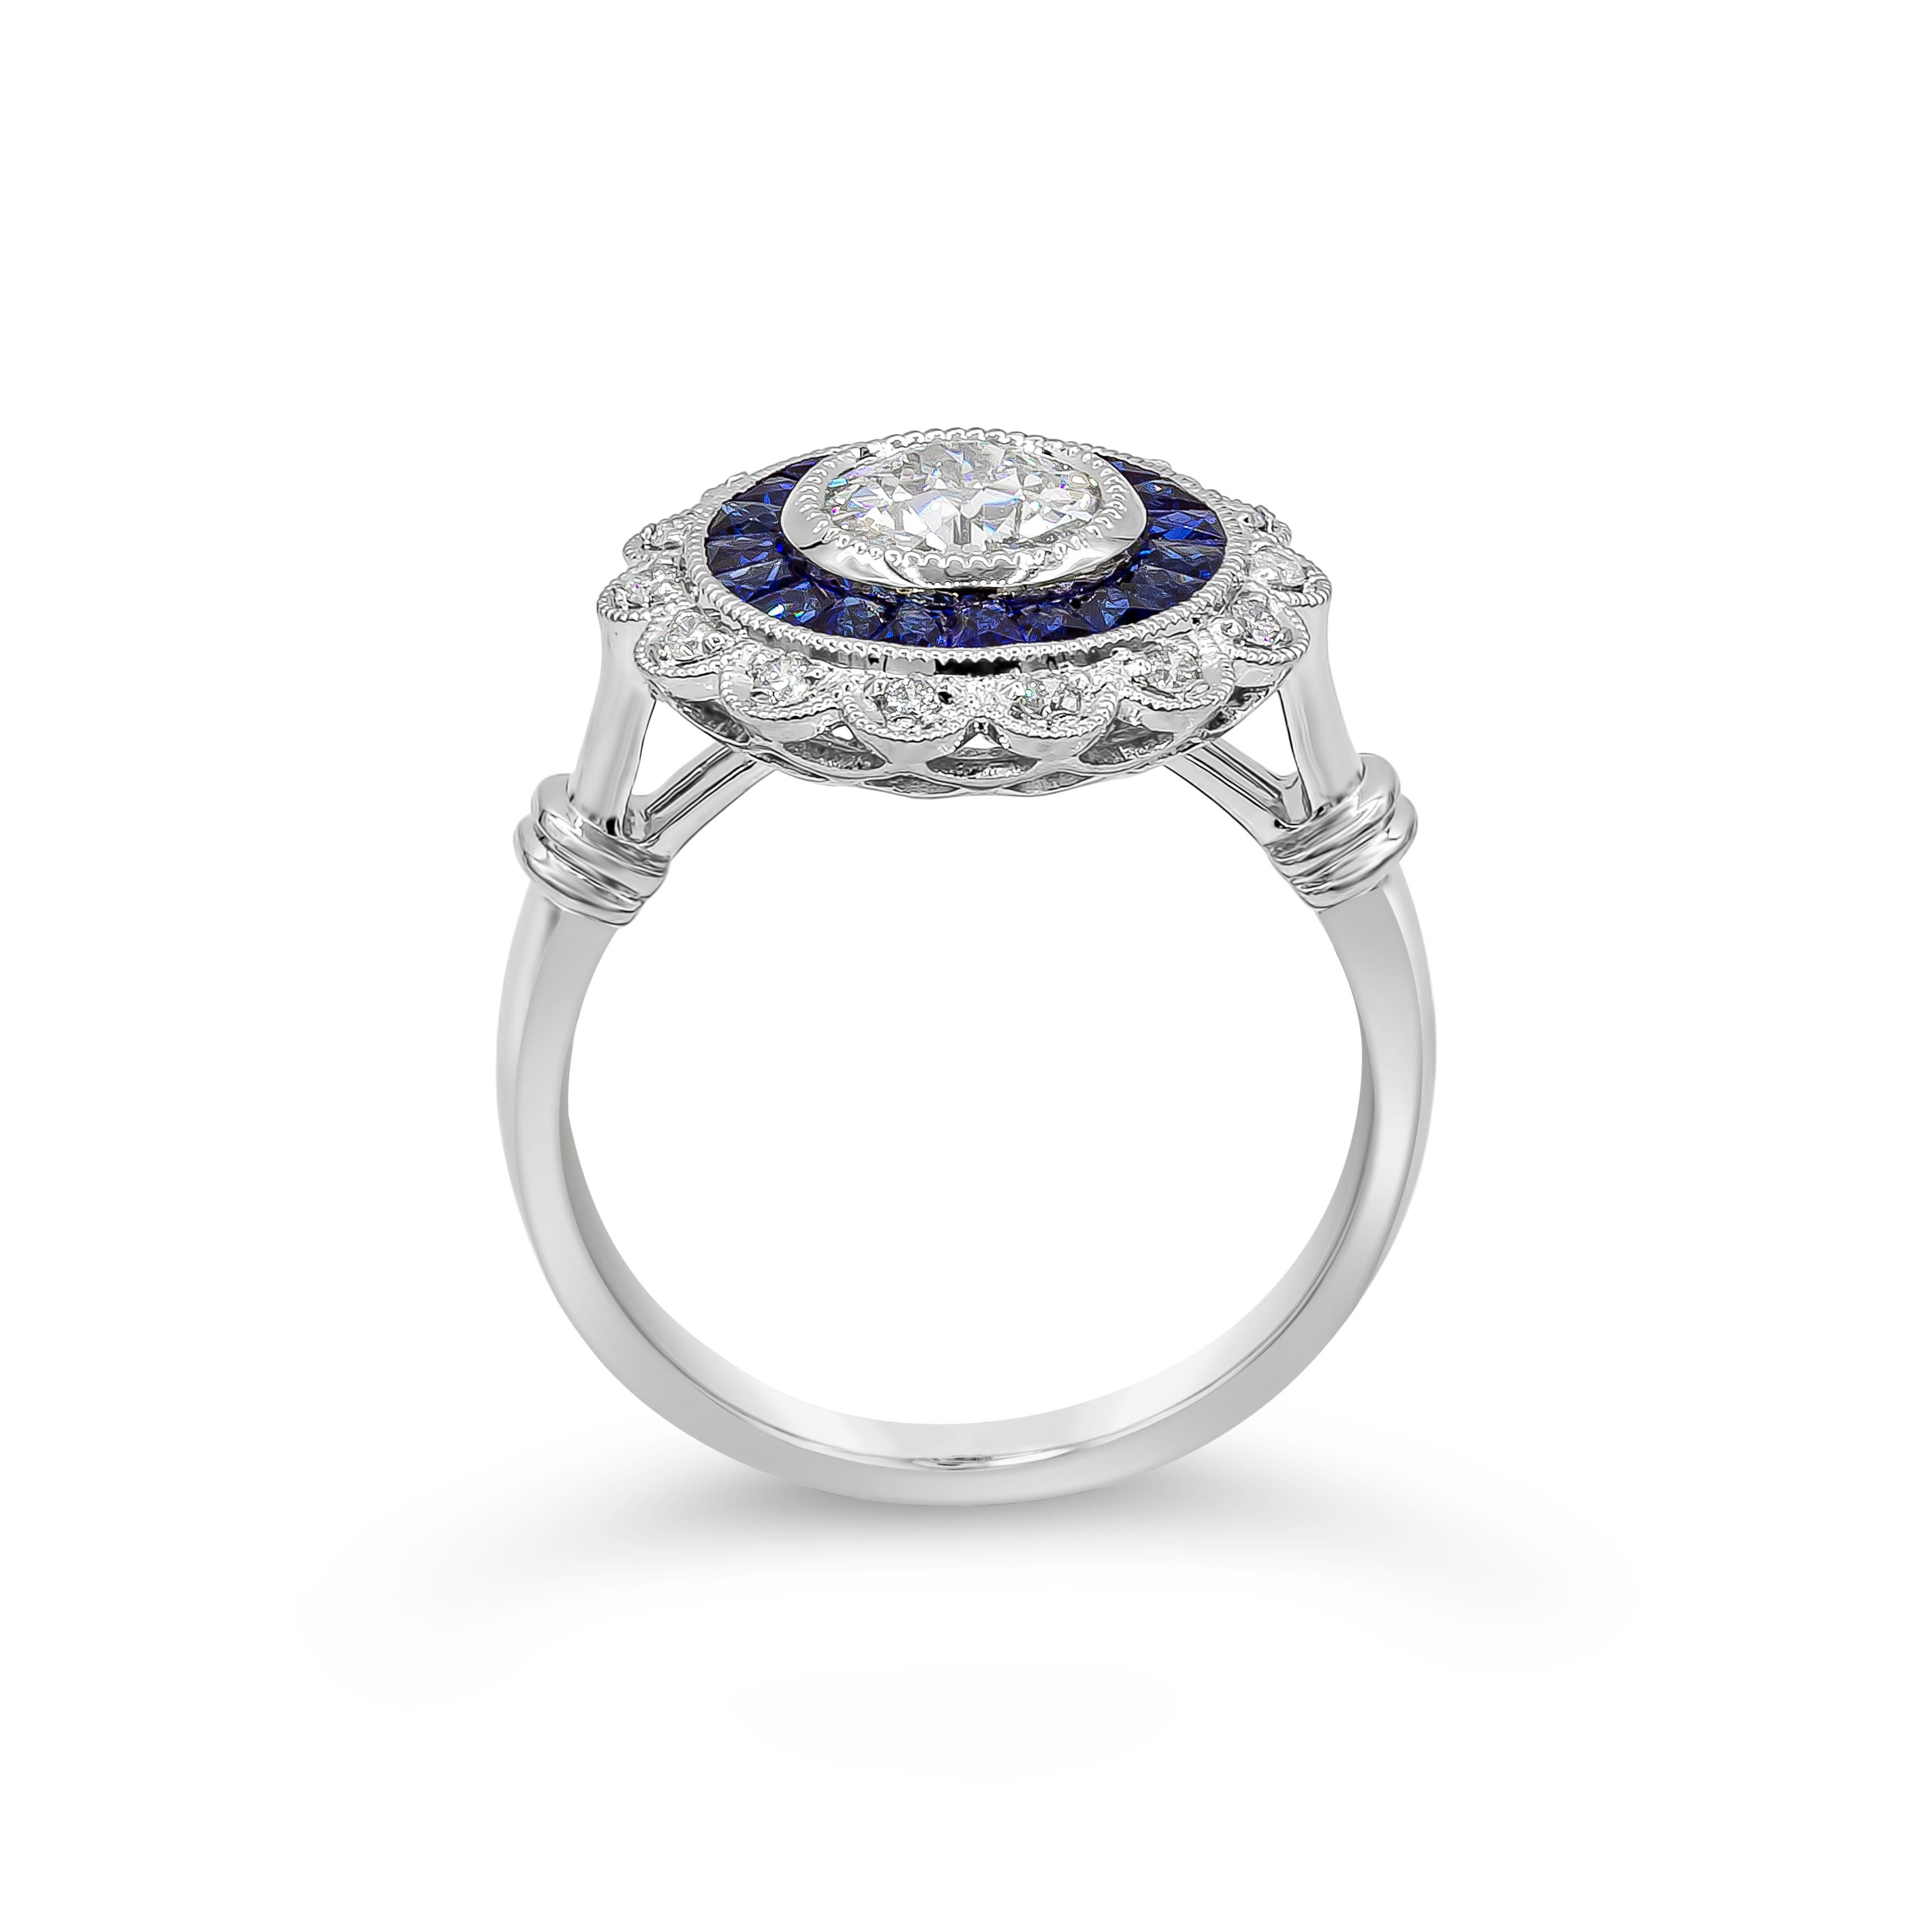 Contemporary EGL USA Certified Old European Cut Diamond and Sapphire Halo Engagement Ring